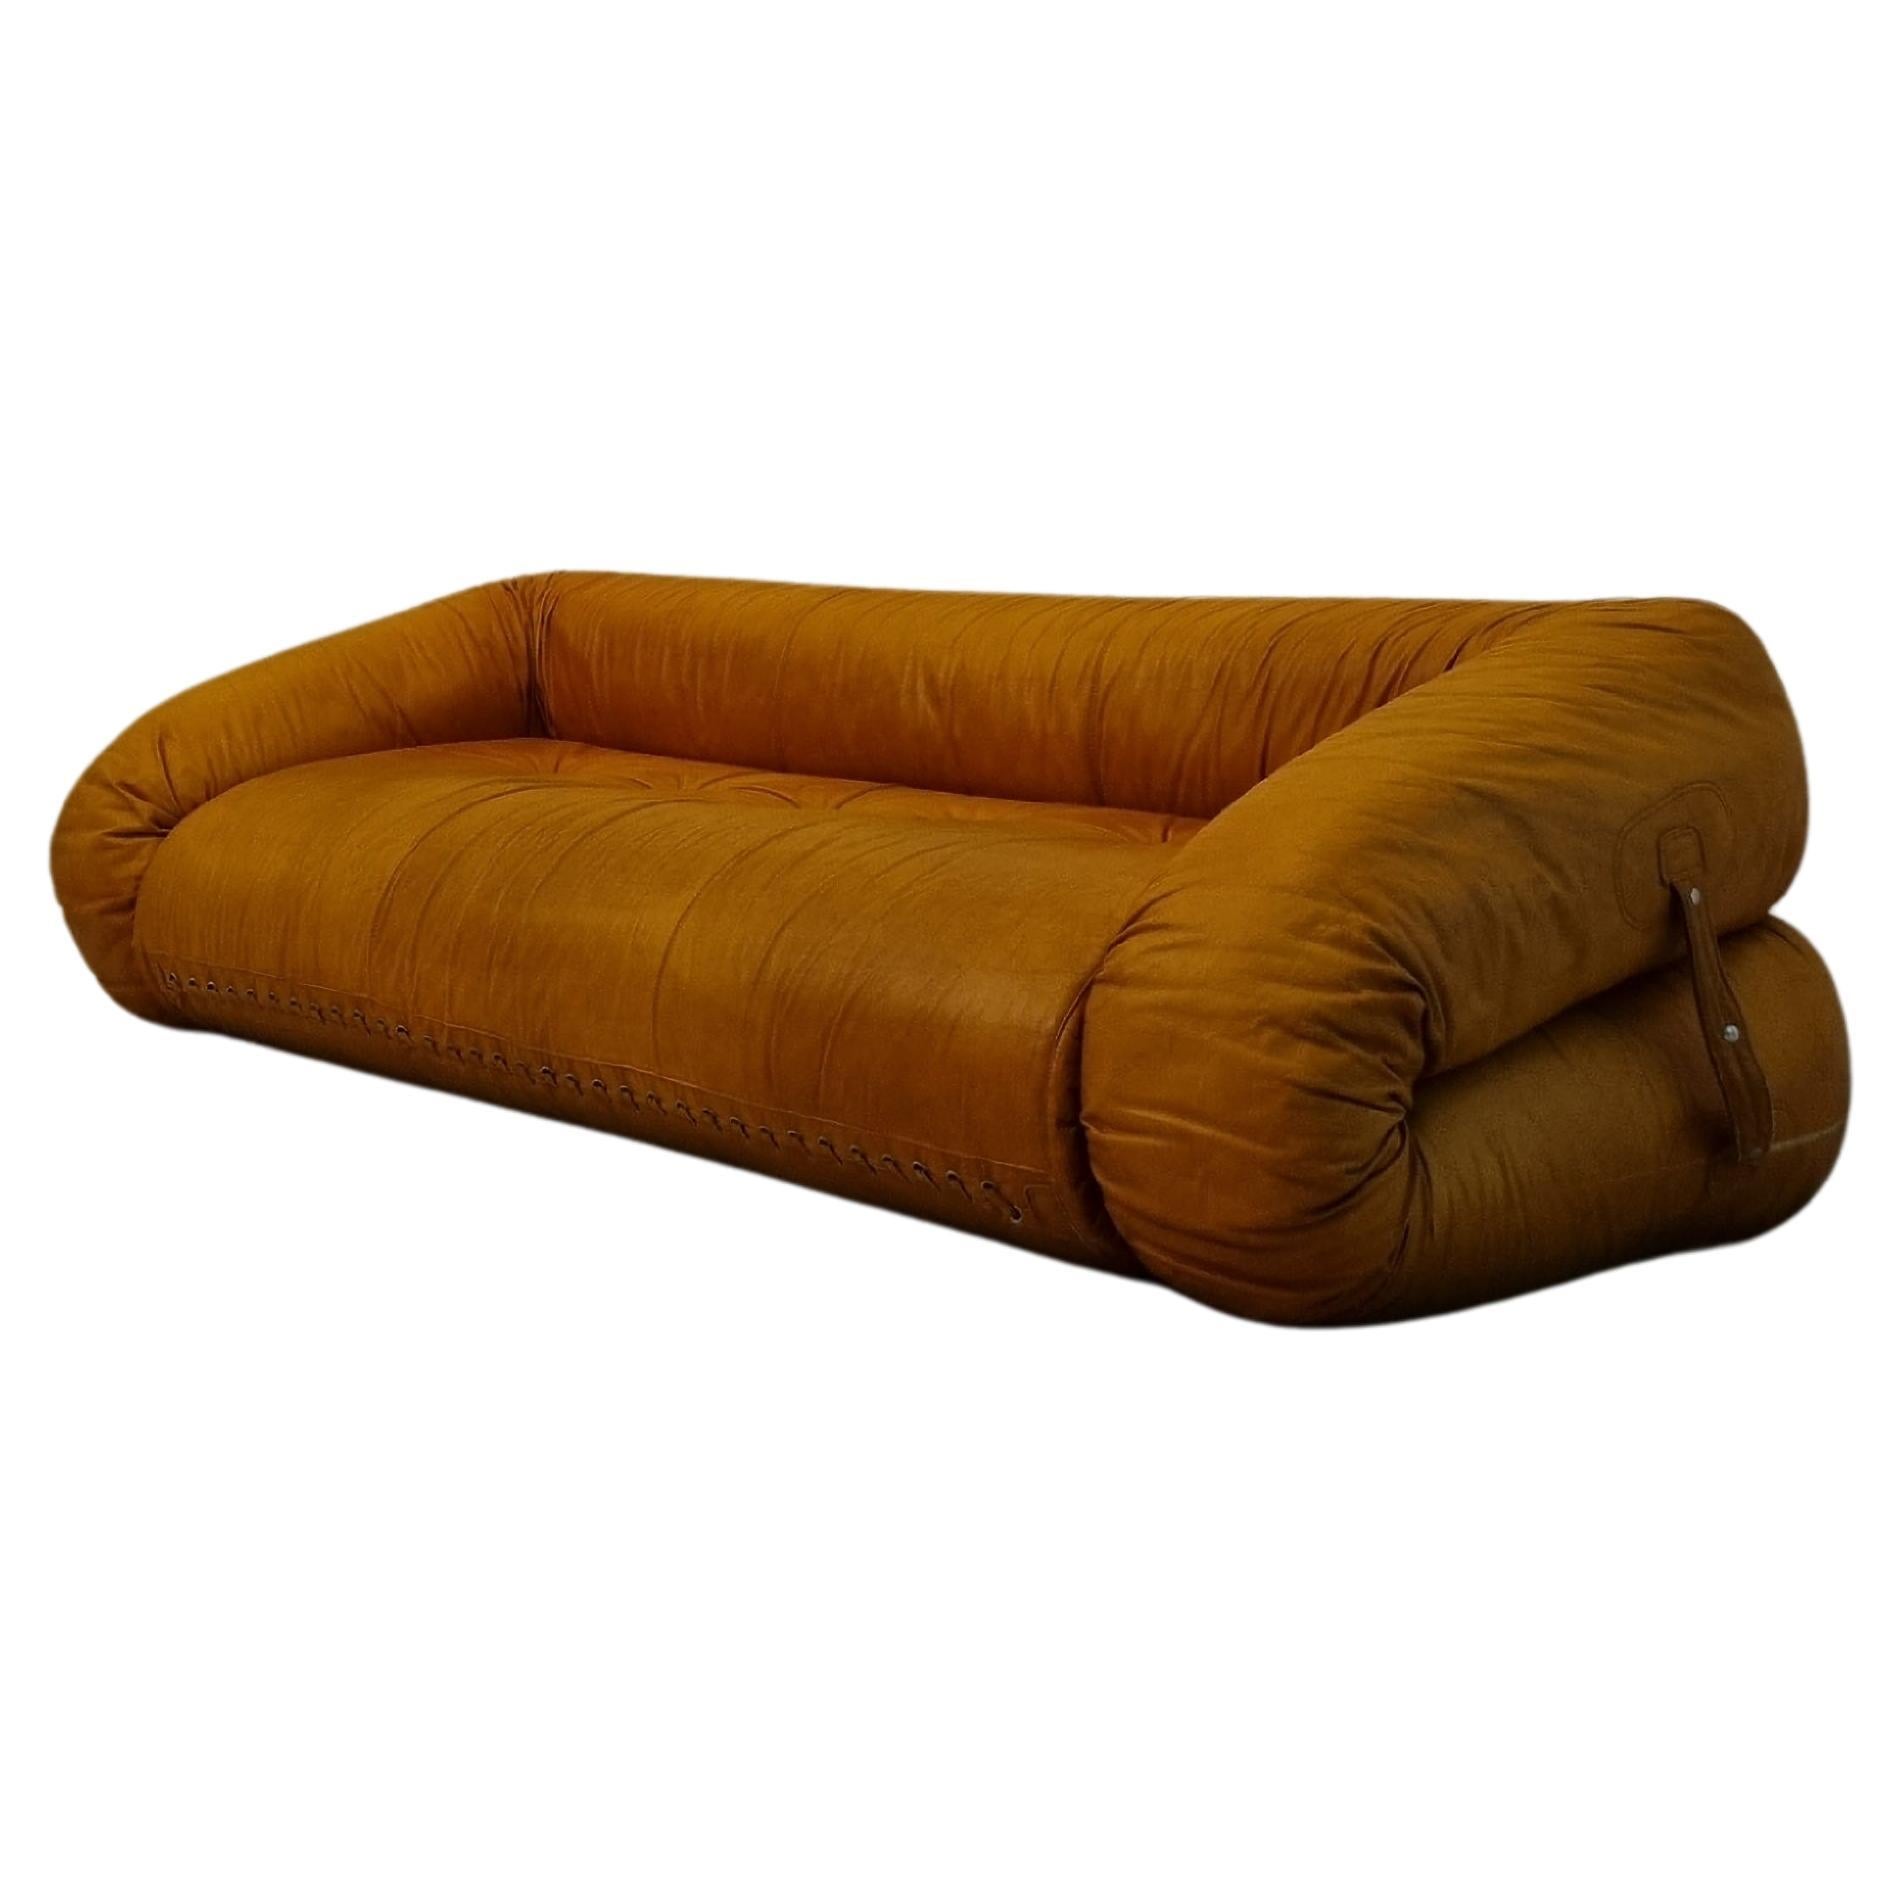 Iconic Anfibio sofa by Alessandro Becchi for Giovannetti 1970 For Sale